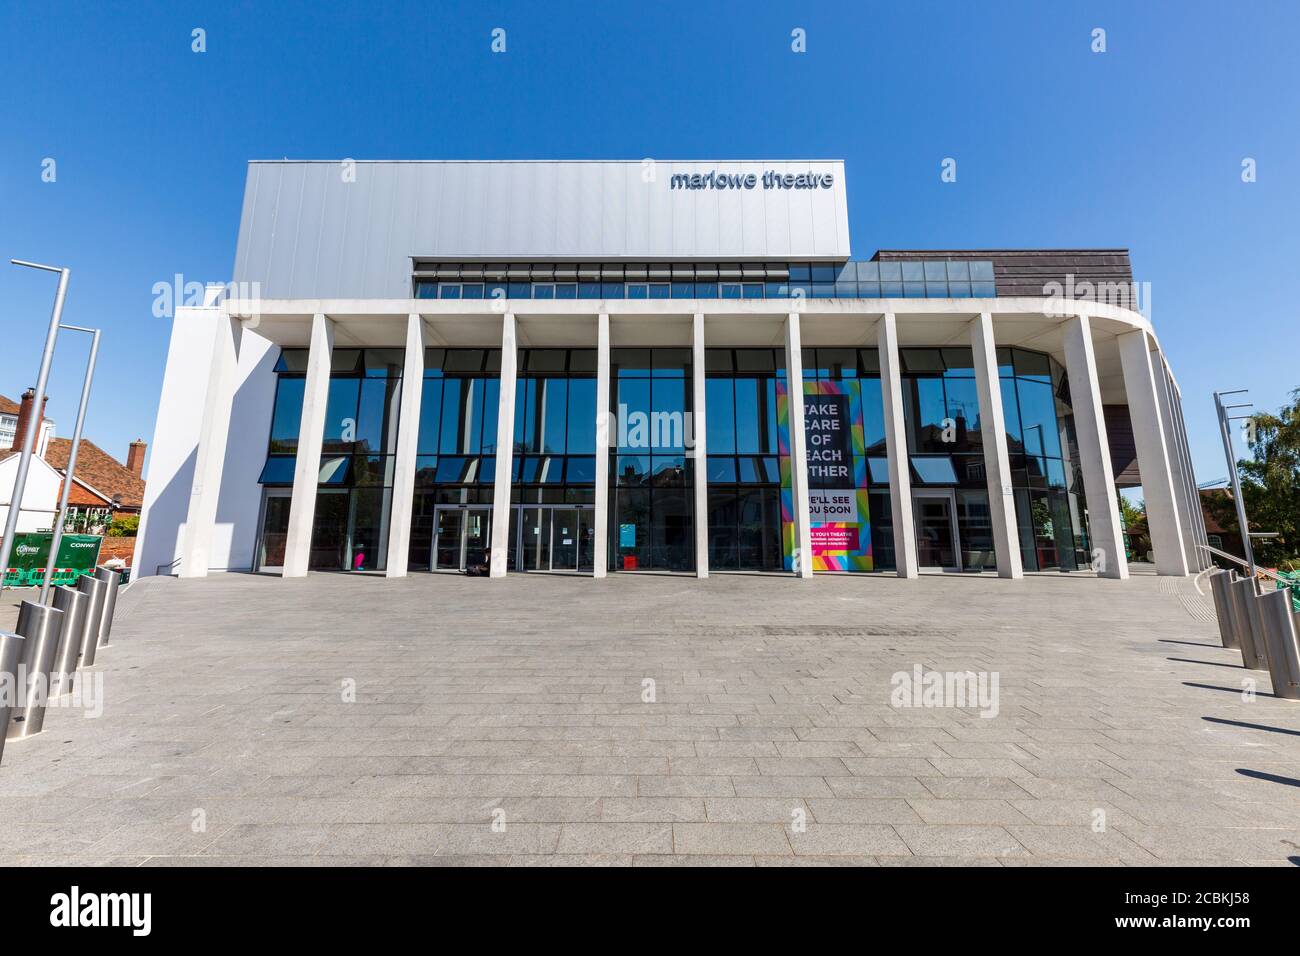 The Marlowe Theatre in Canterbury, Kent, England Stock Photo